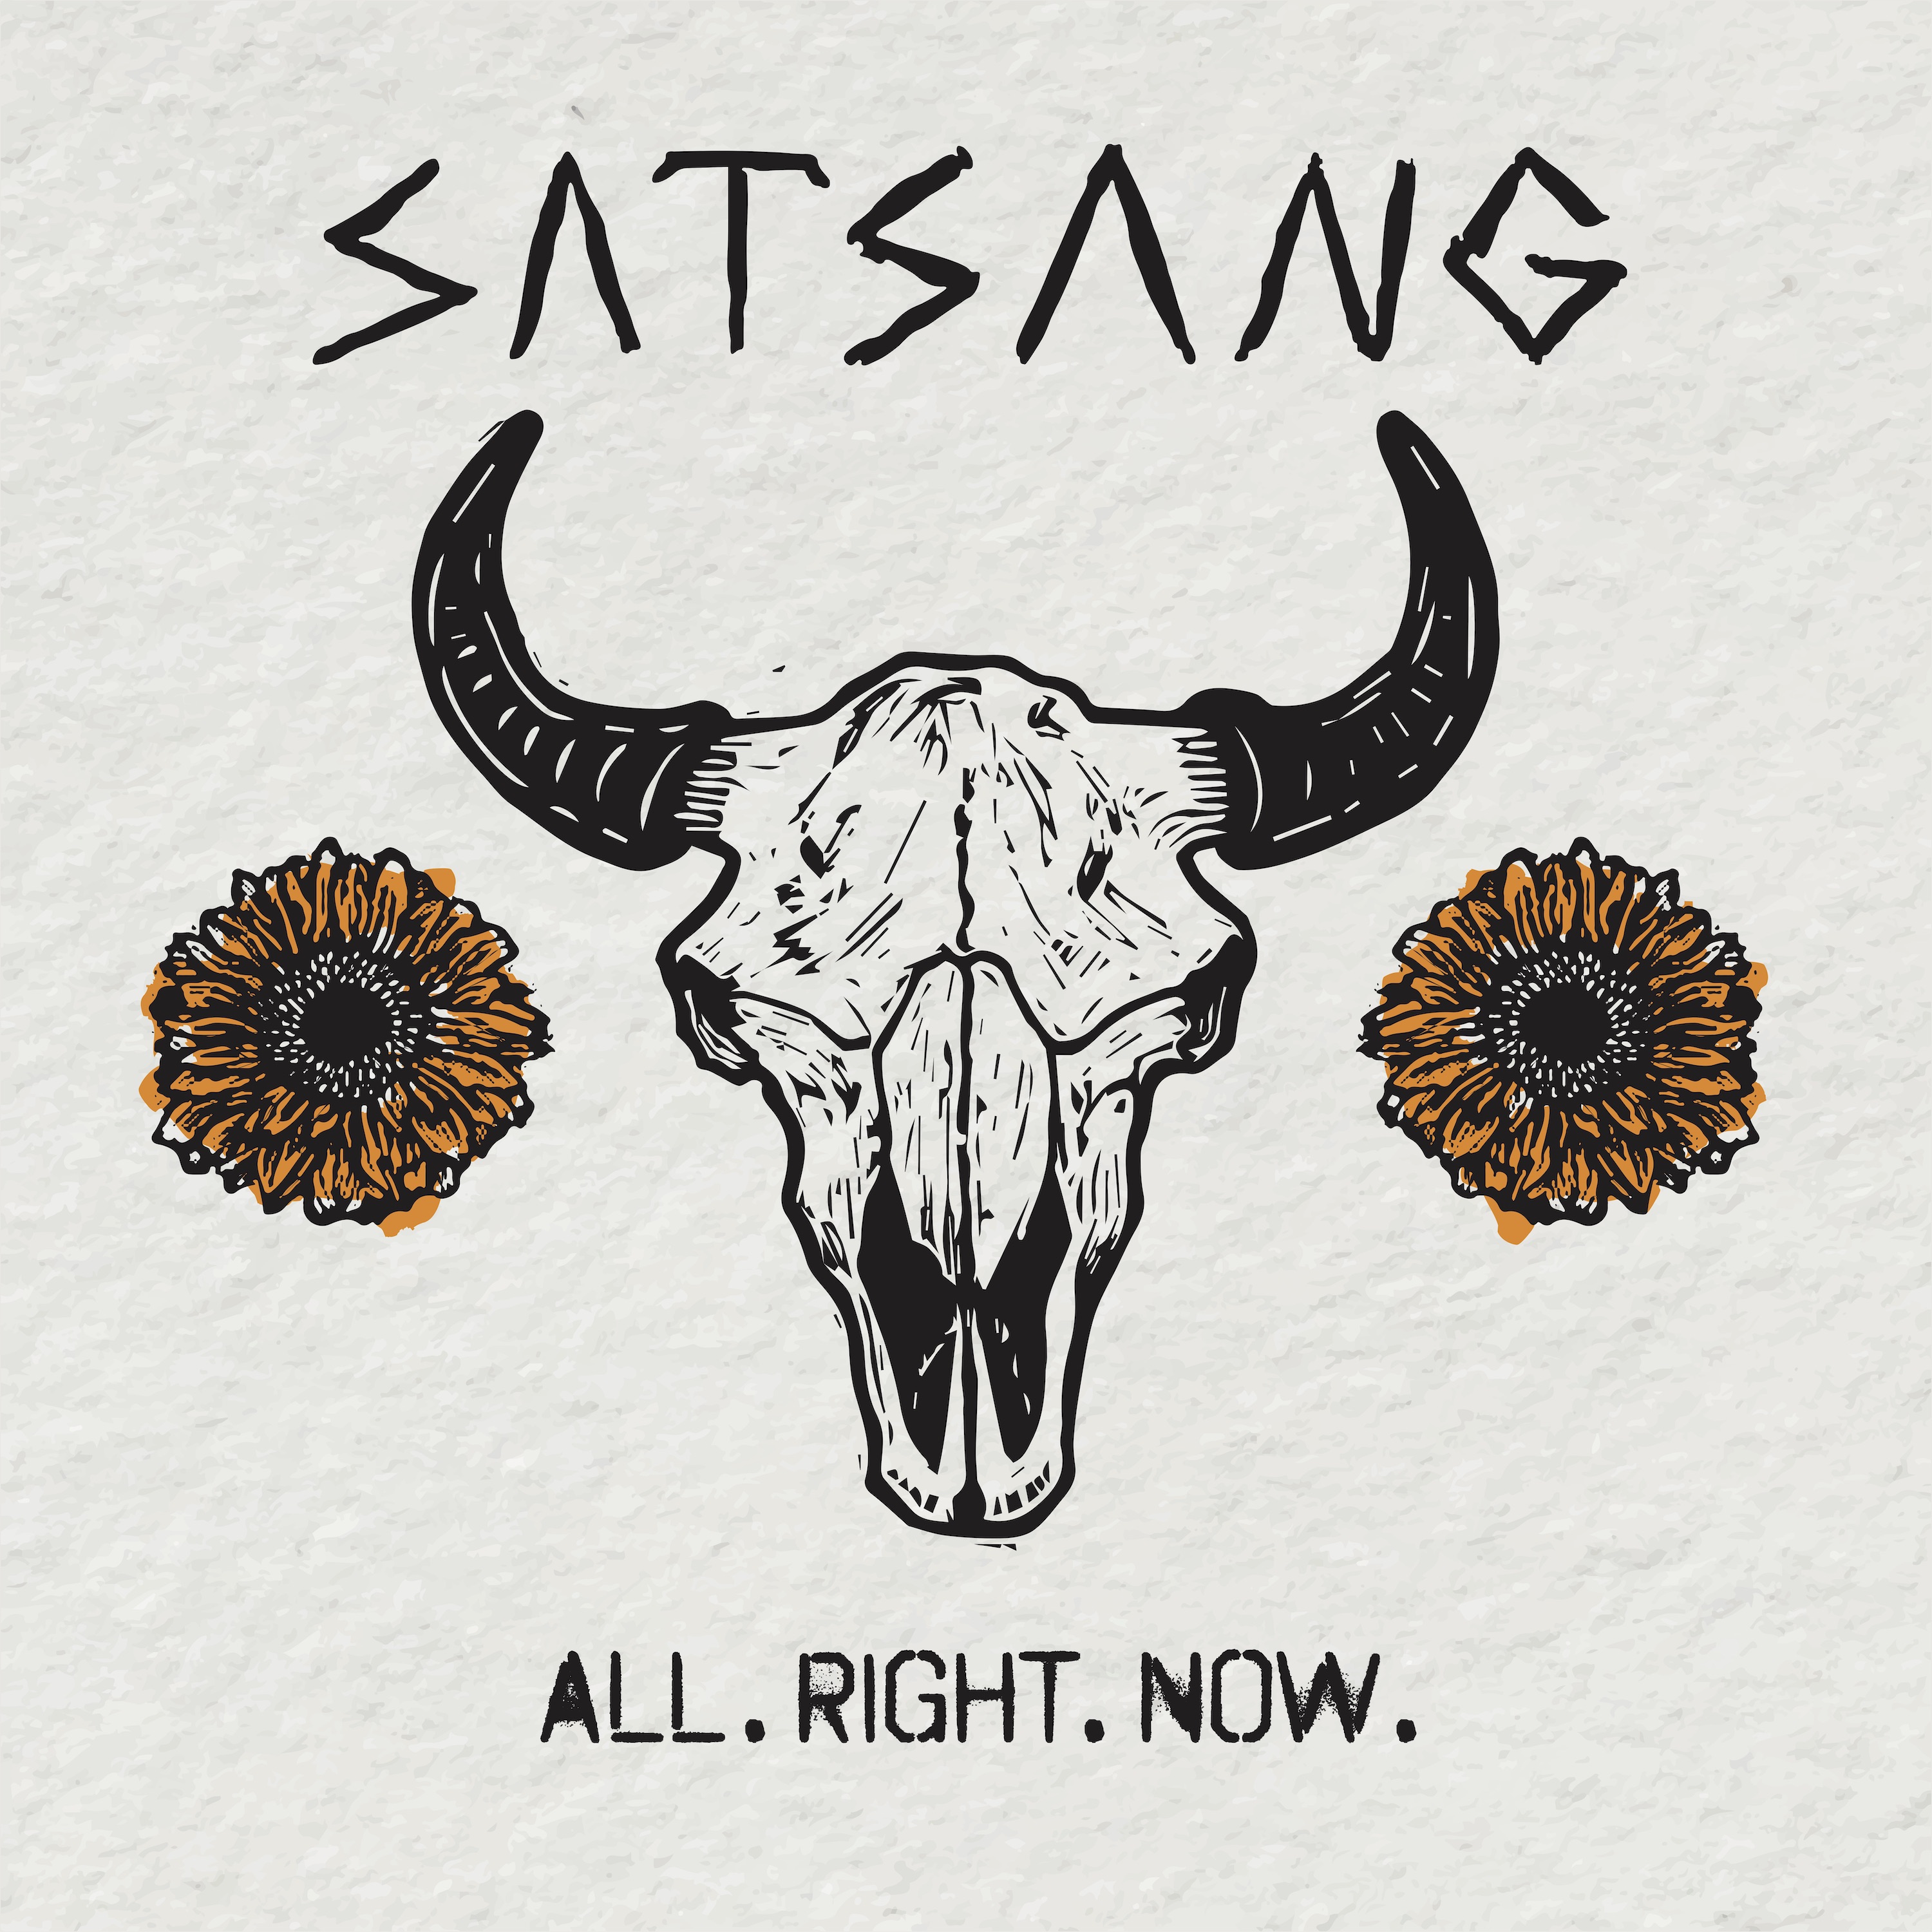 Satsang: ‘All. Right. Now.’